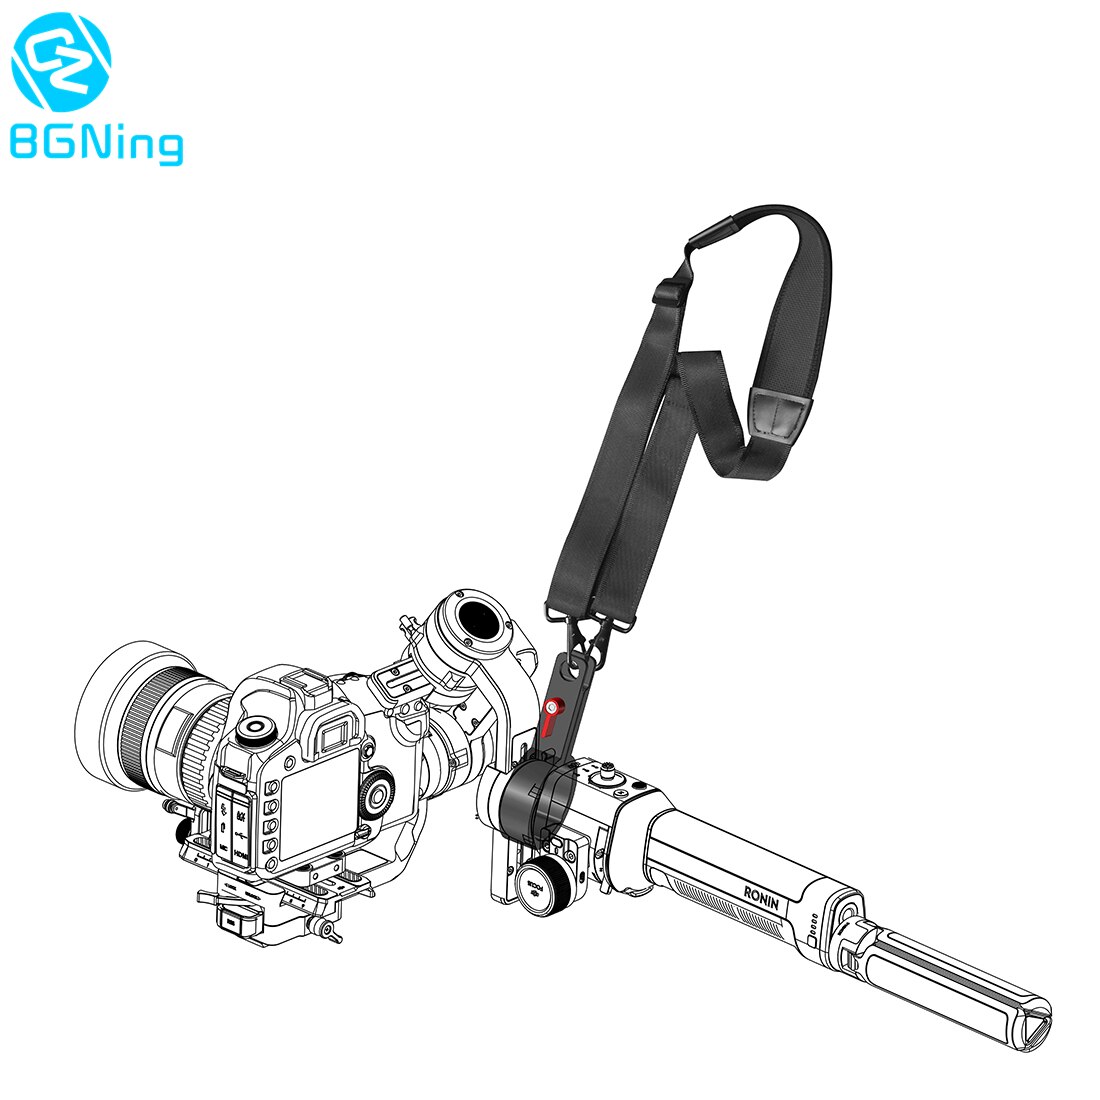 BGNing Hang Buckle Hand Release Shoulder Strap Belt Sling Clasp for DJI RONIN S 3 Axis Gimbal Stabilizer with Fix Clip Clamp